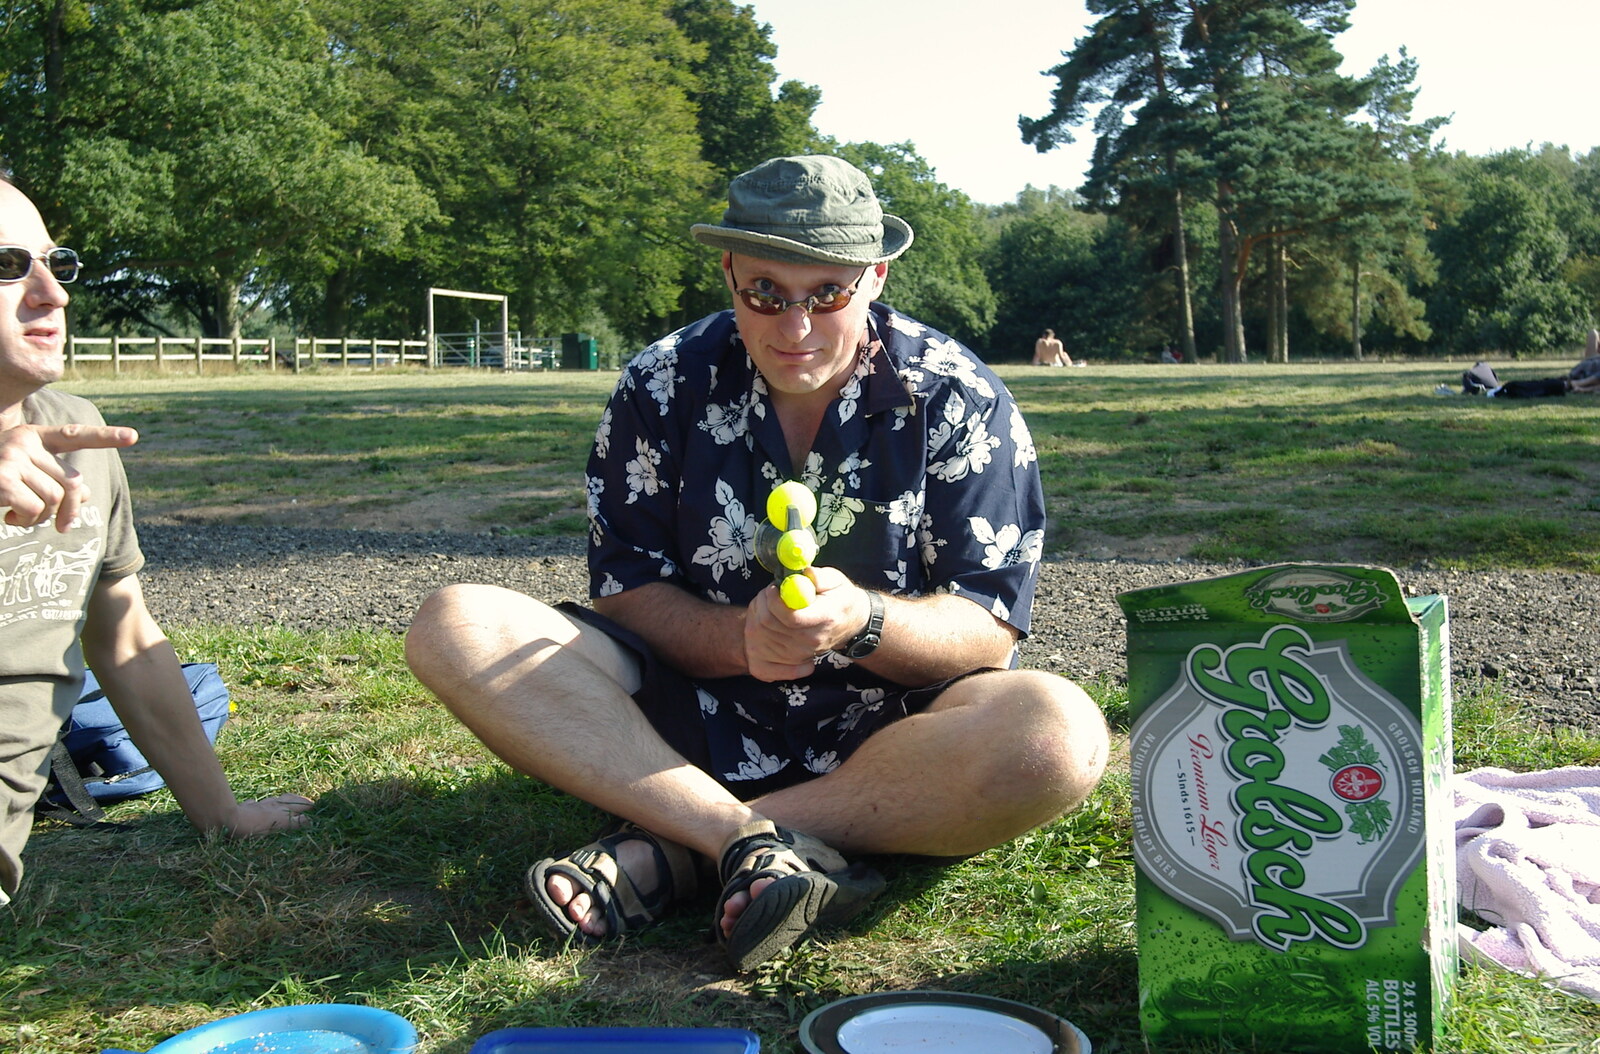 Gov aims a waterpistol from Picnic at the Heath, Knettishall, Norfolk - 4th September 2005